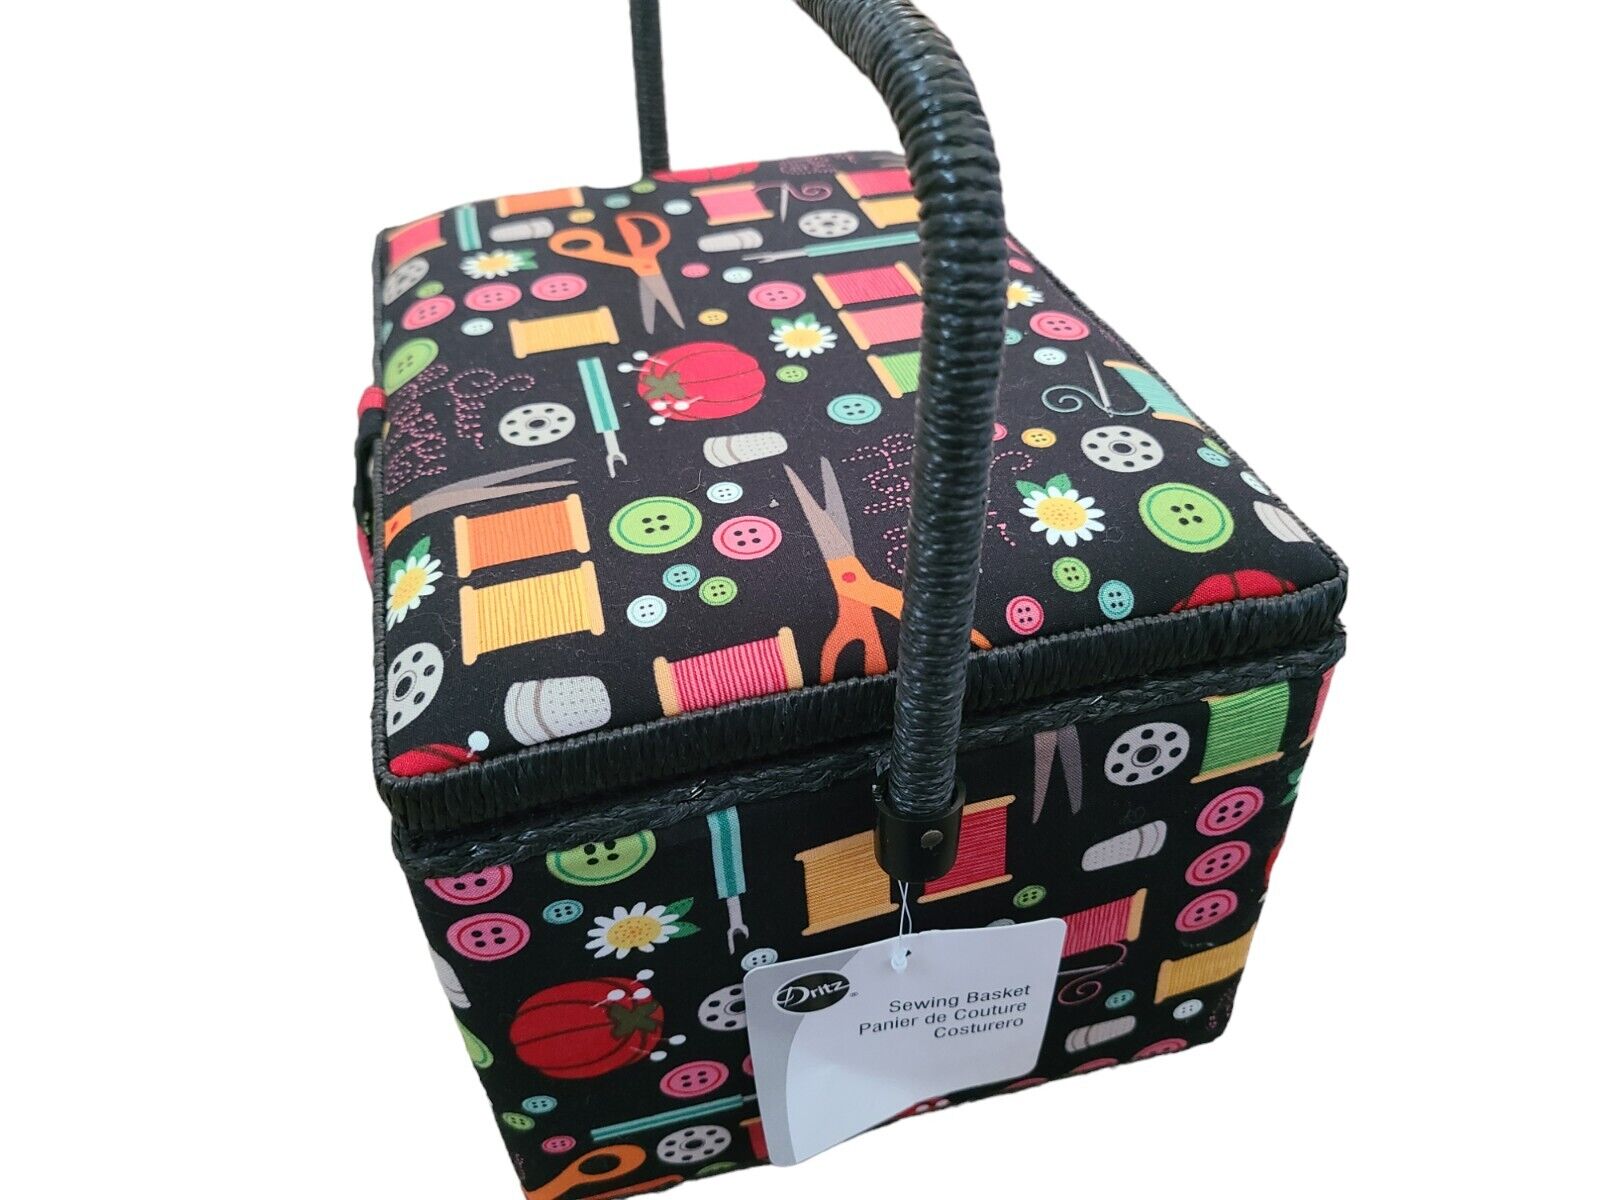 Sewing Basket Box Large Colorful Fabric Wood  Brand New With Tags NWT